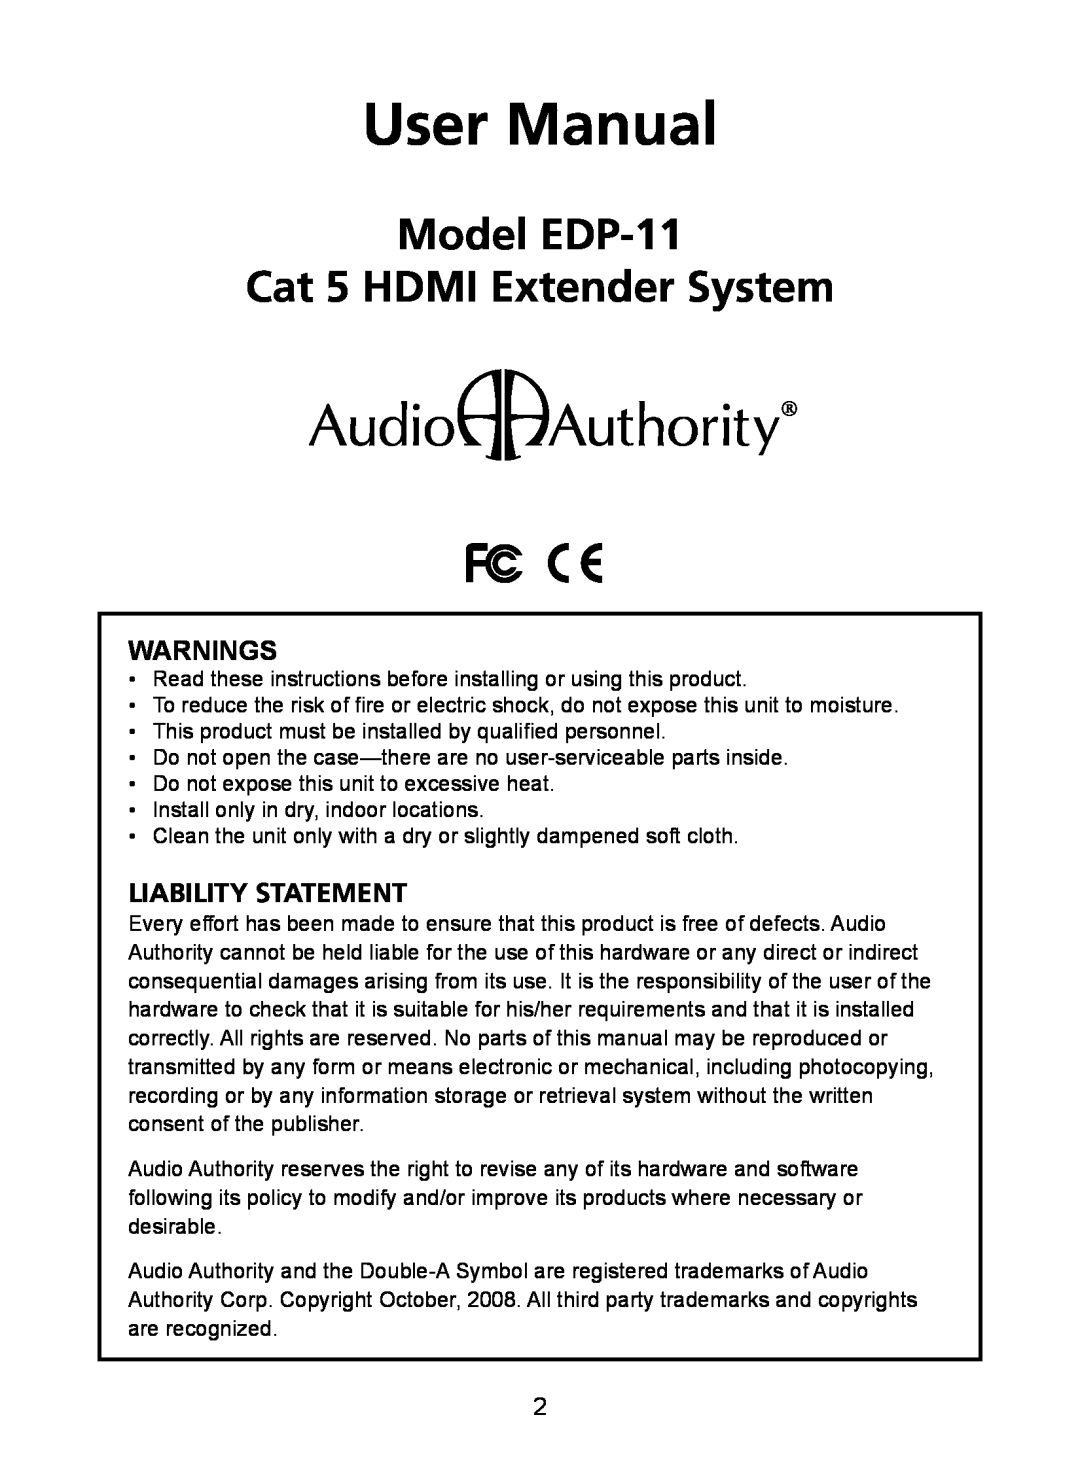 Audio Authority user manual Warnings, Liability Statement, User Manual, Model EDP-11 Cat 5 HDMI Extender System 